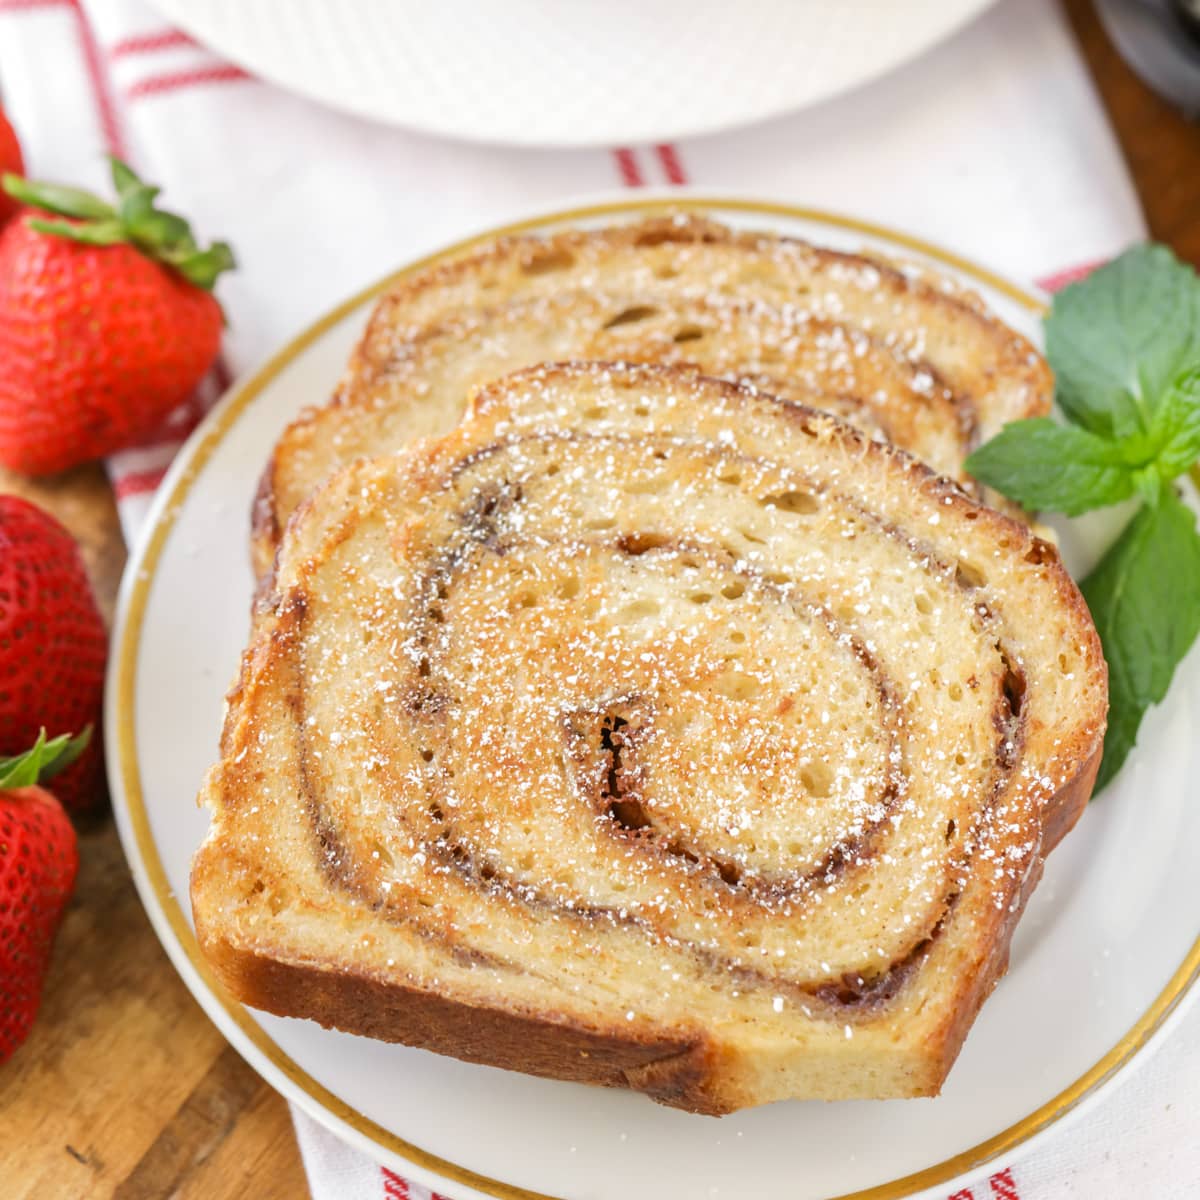 Cooked cinnamon bread french toast slices sprinkled with powder sugar.